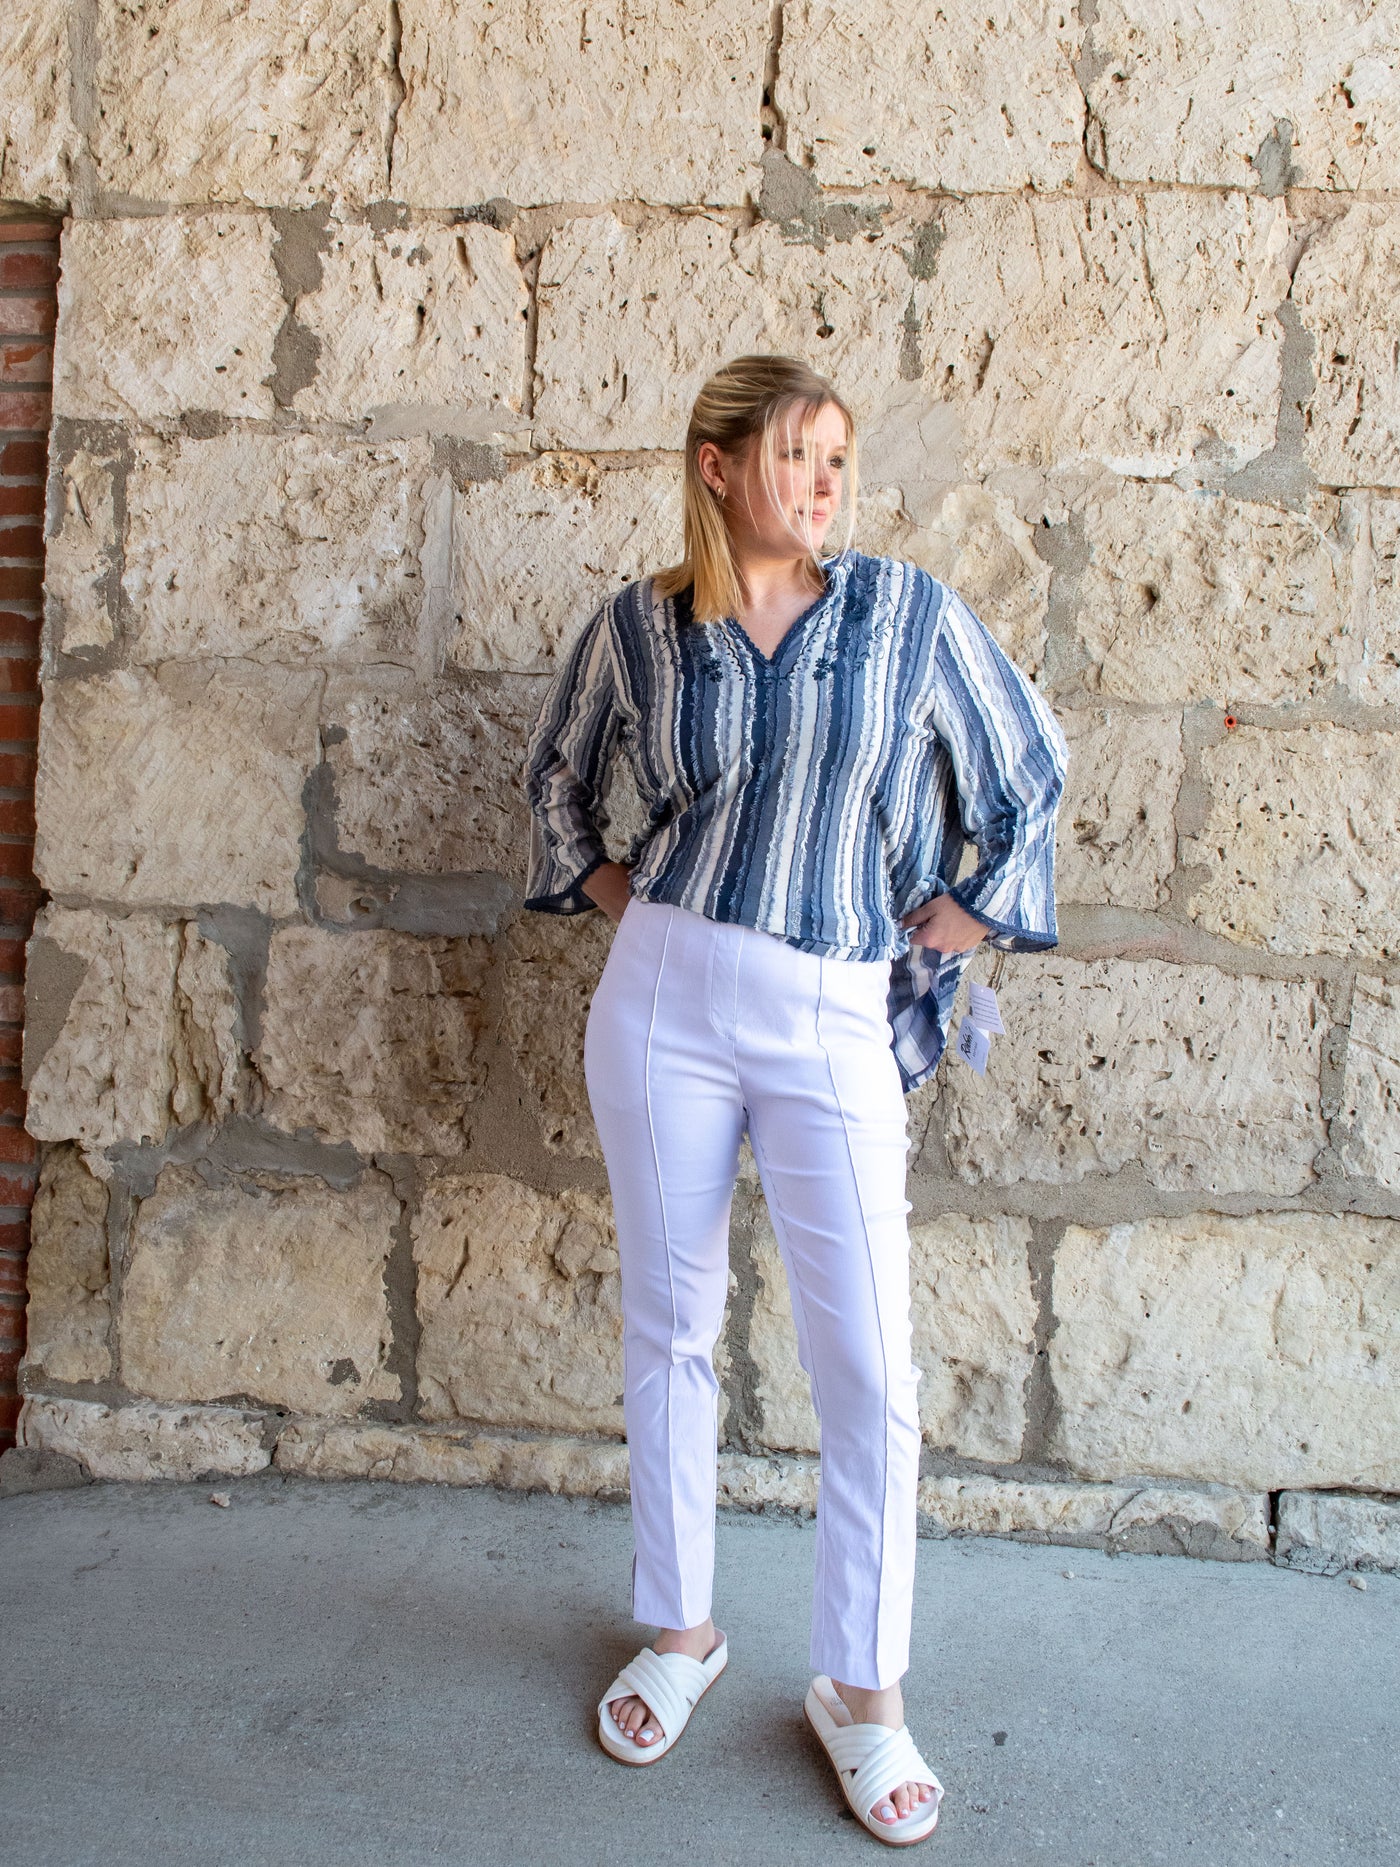 A model wearing a pair of white front seam pull-on pants with a blue striped top and white slides.